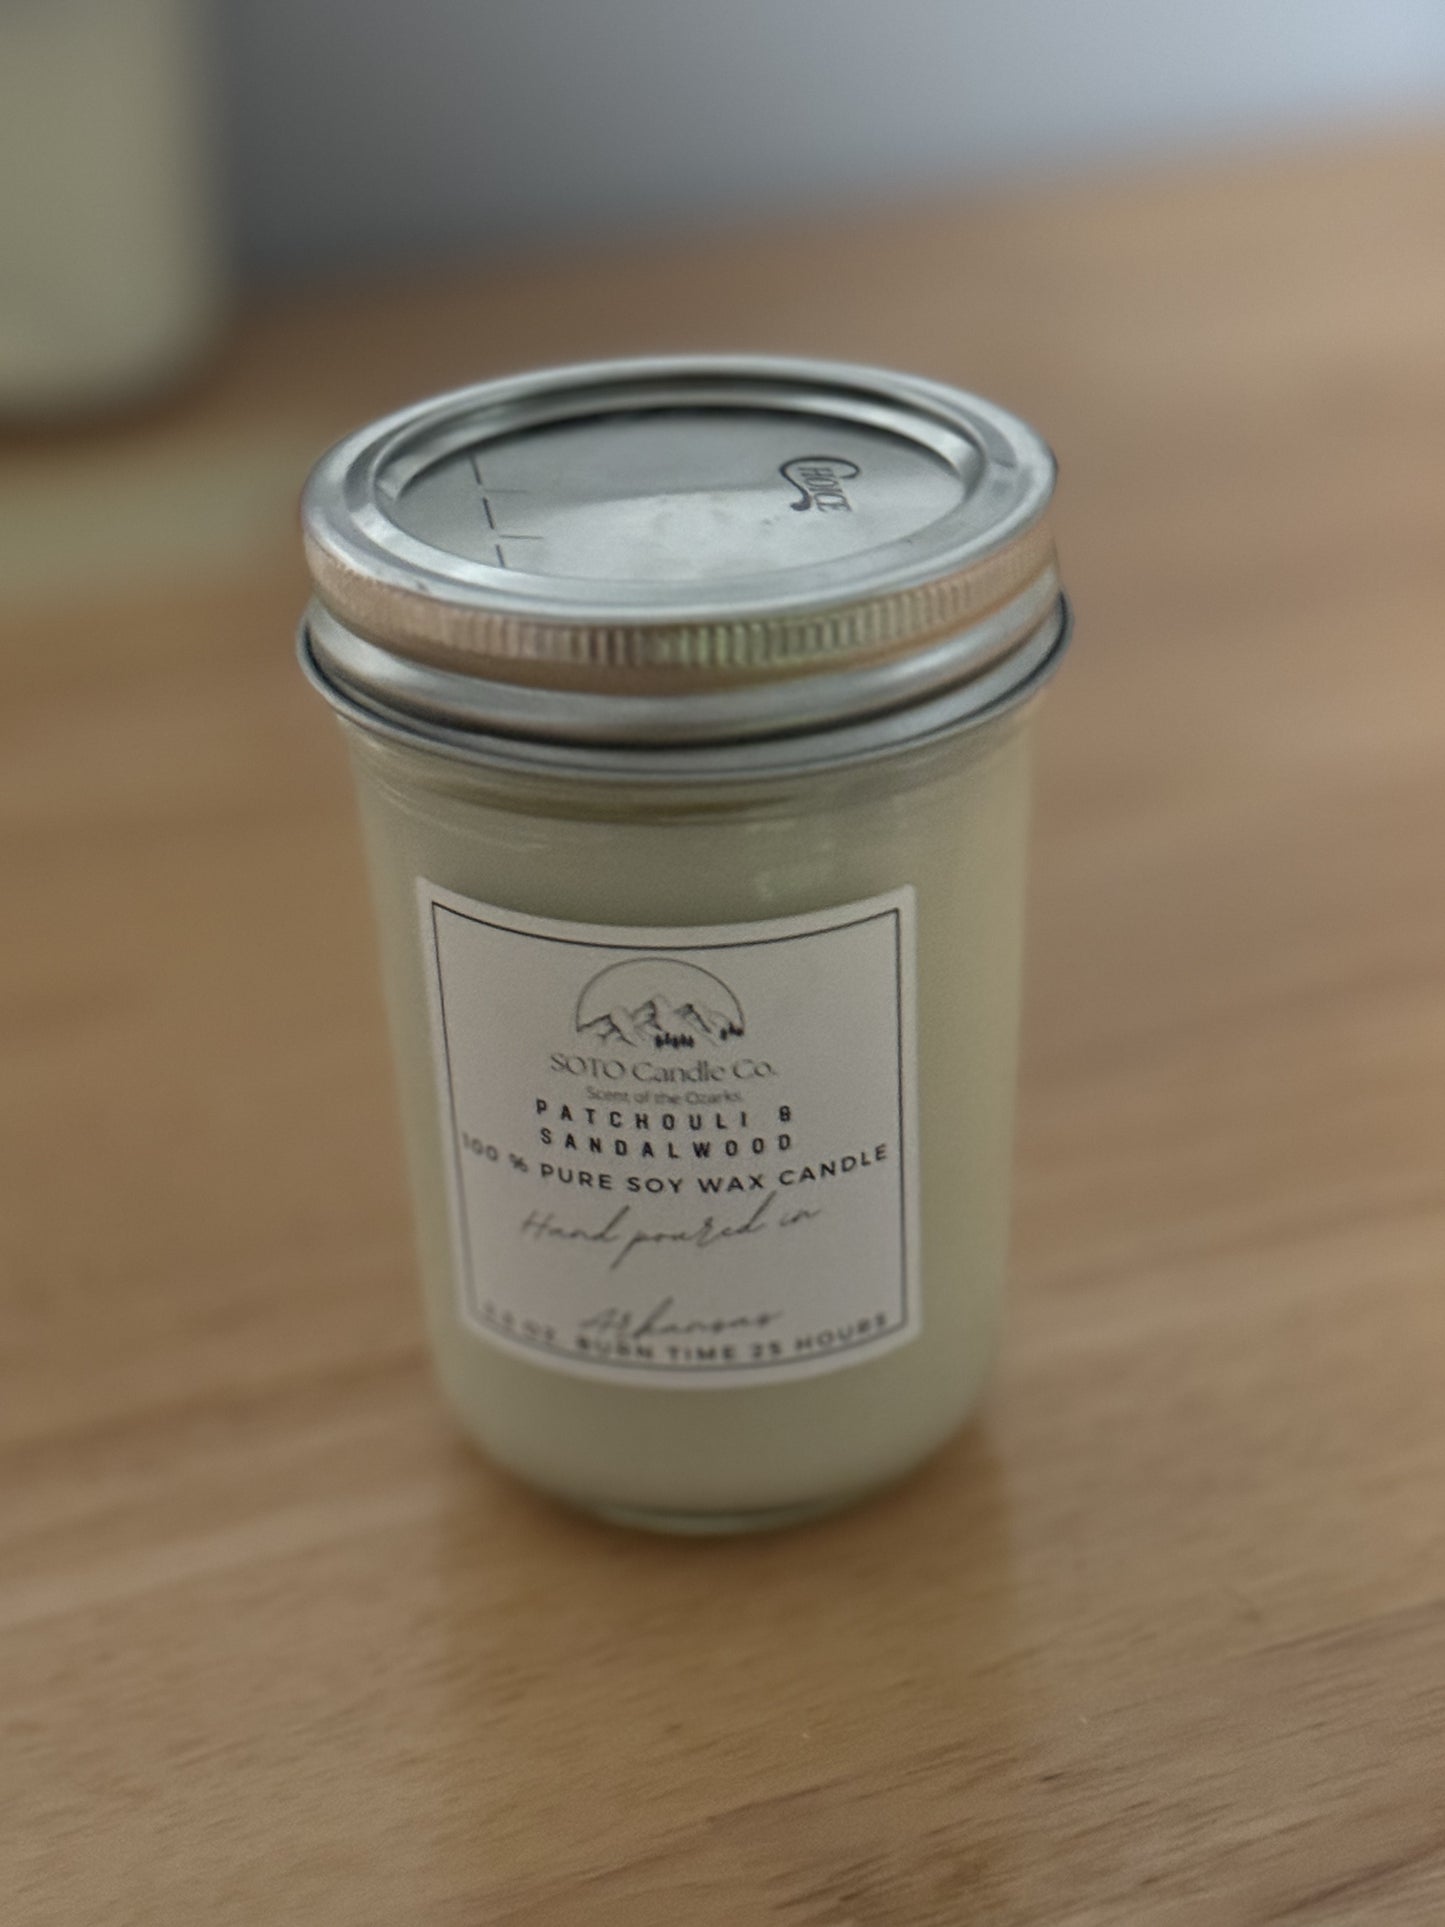 SOTO Candle Co-Mason Jar Single Wick Soy Candle Non Toxic & All Natural